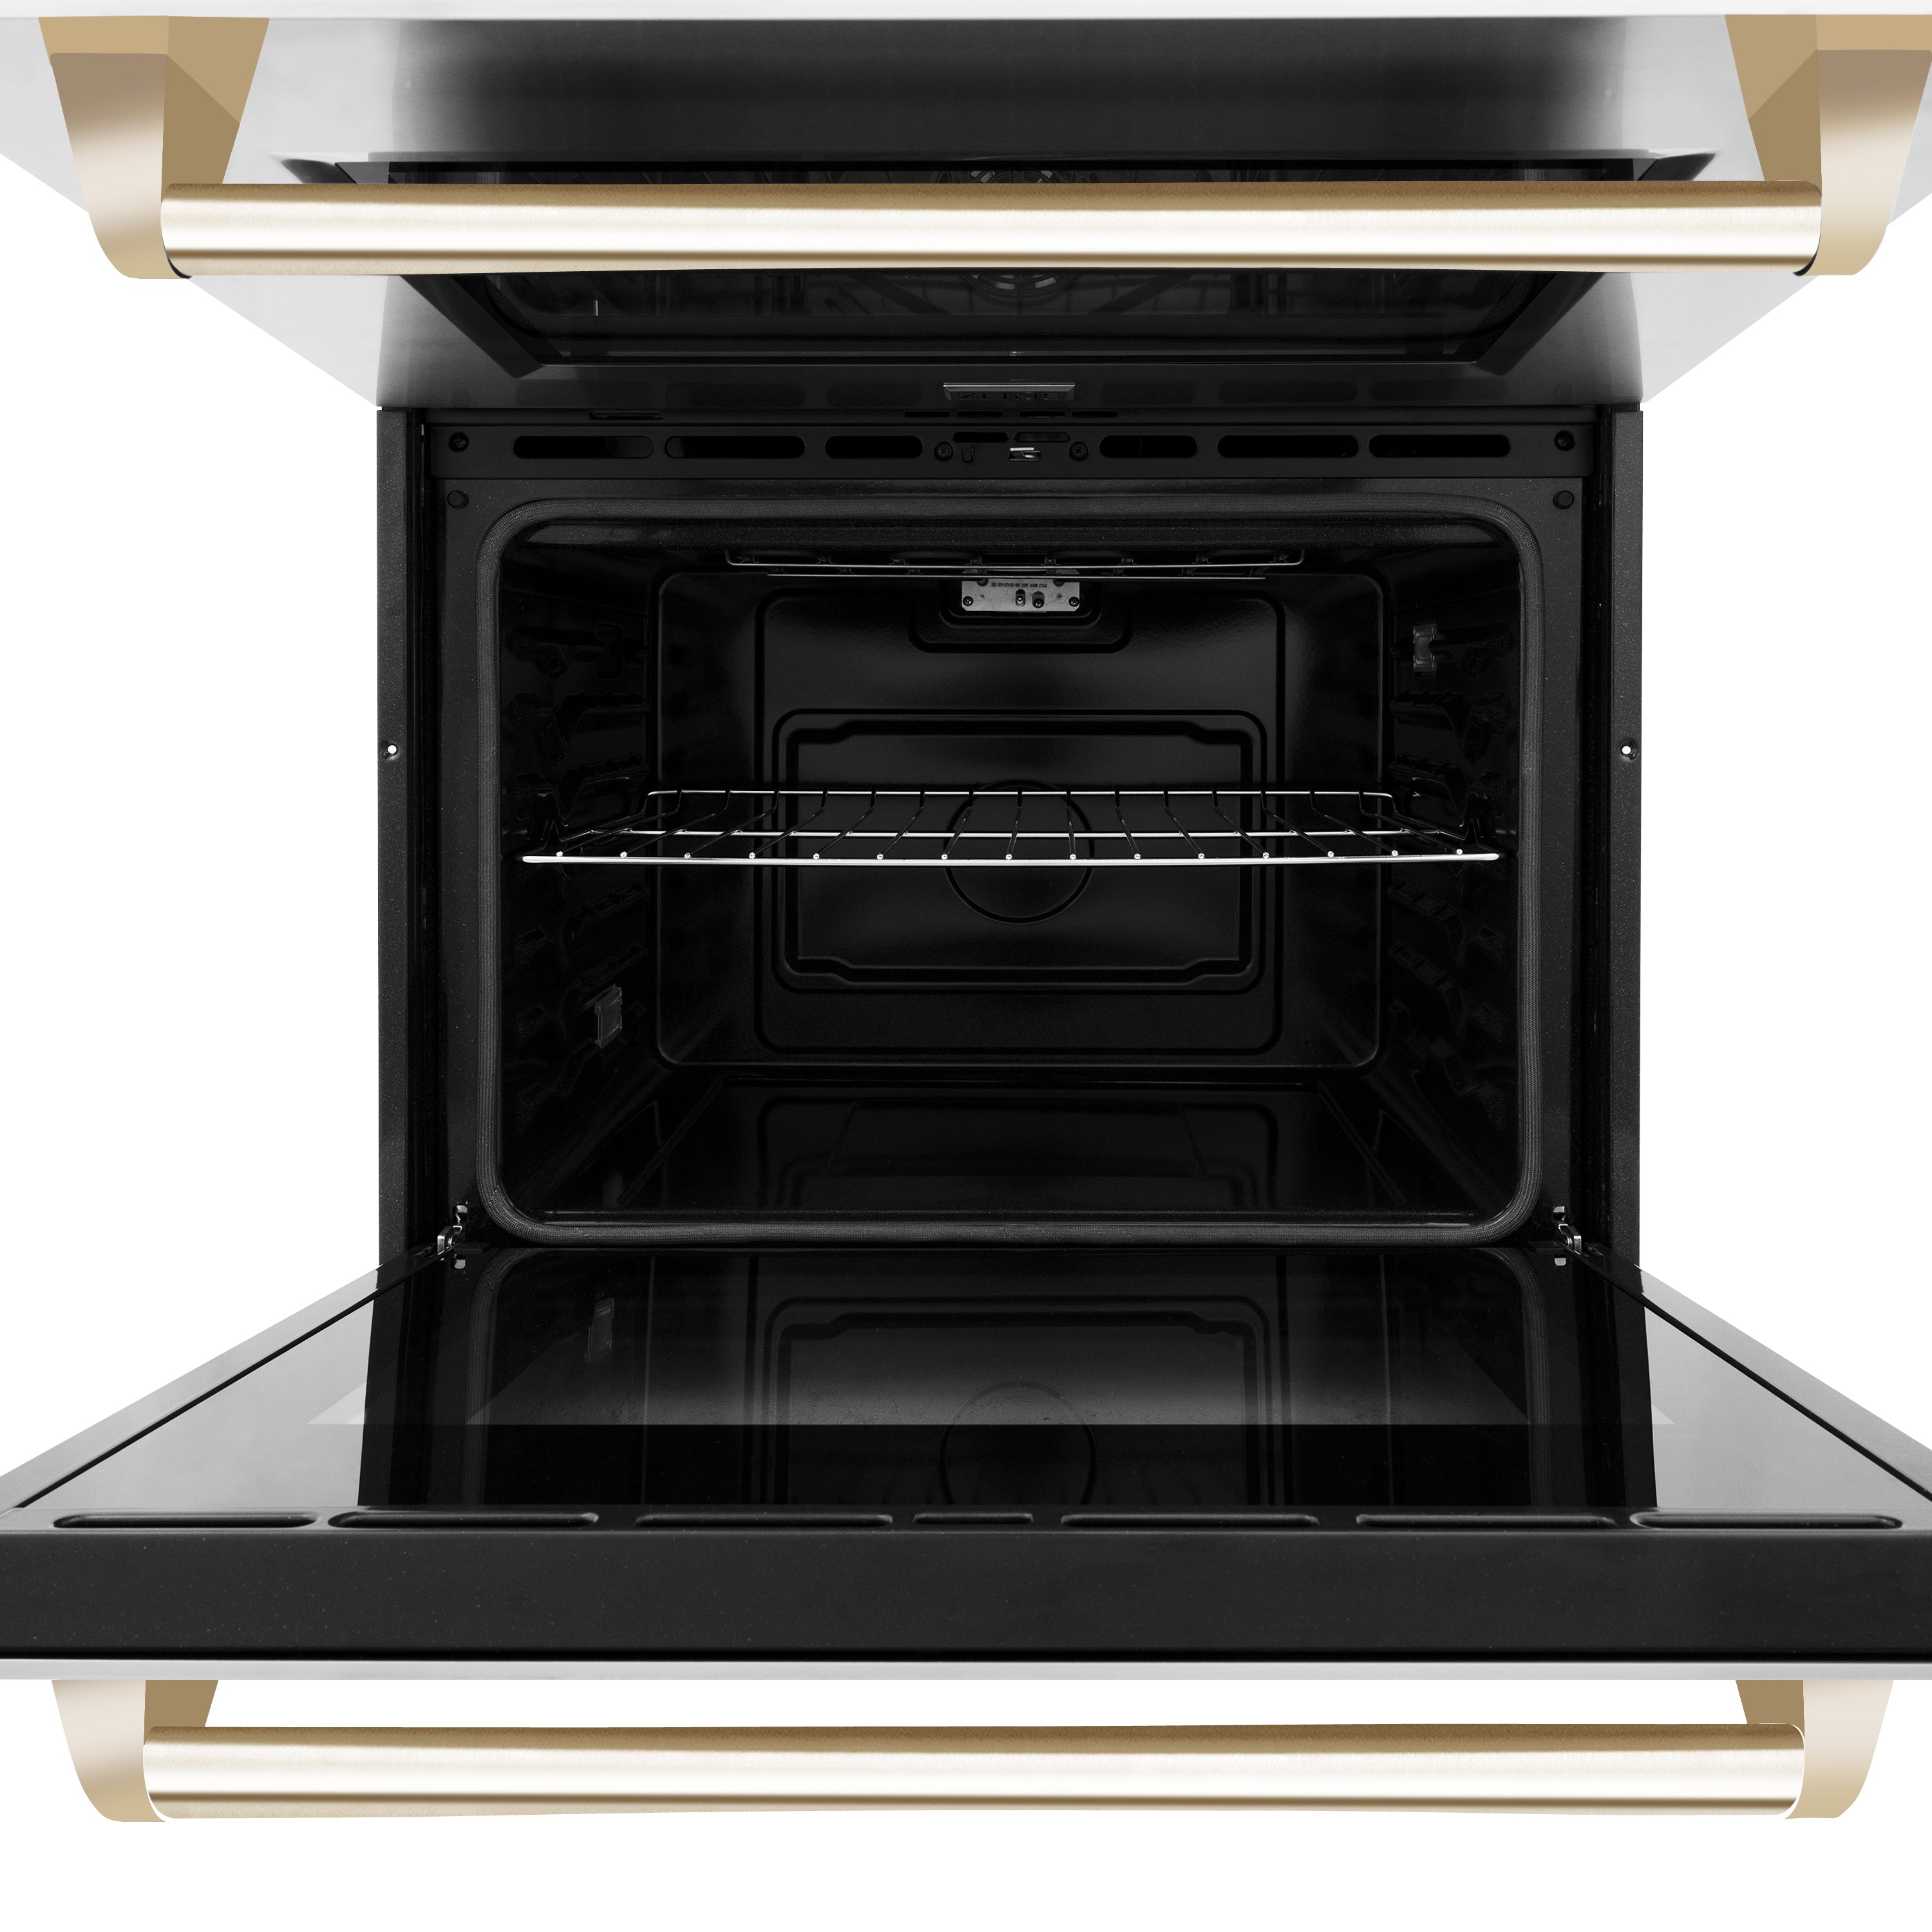 ZLINE 30" Autograph Edition Double Wall Oven with Self Clean and True Convection in Stainless Steel and Gold (AWDZ-30-G)